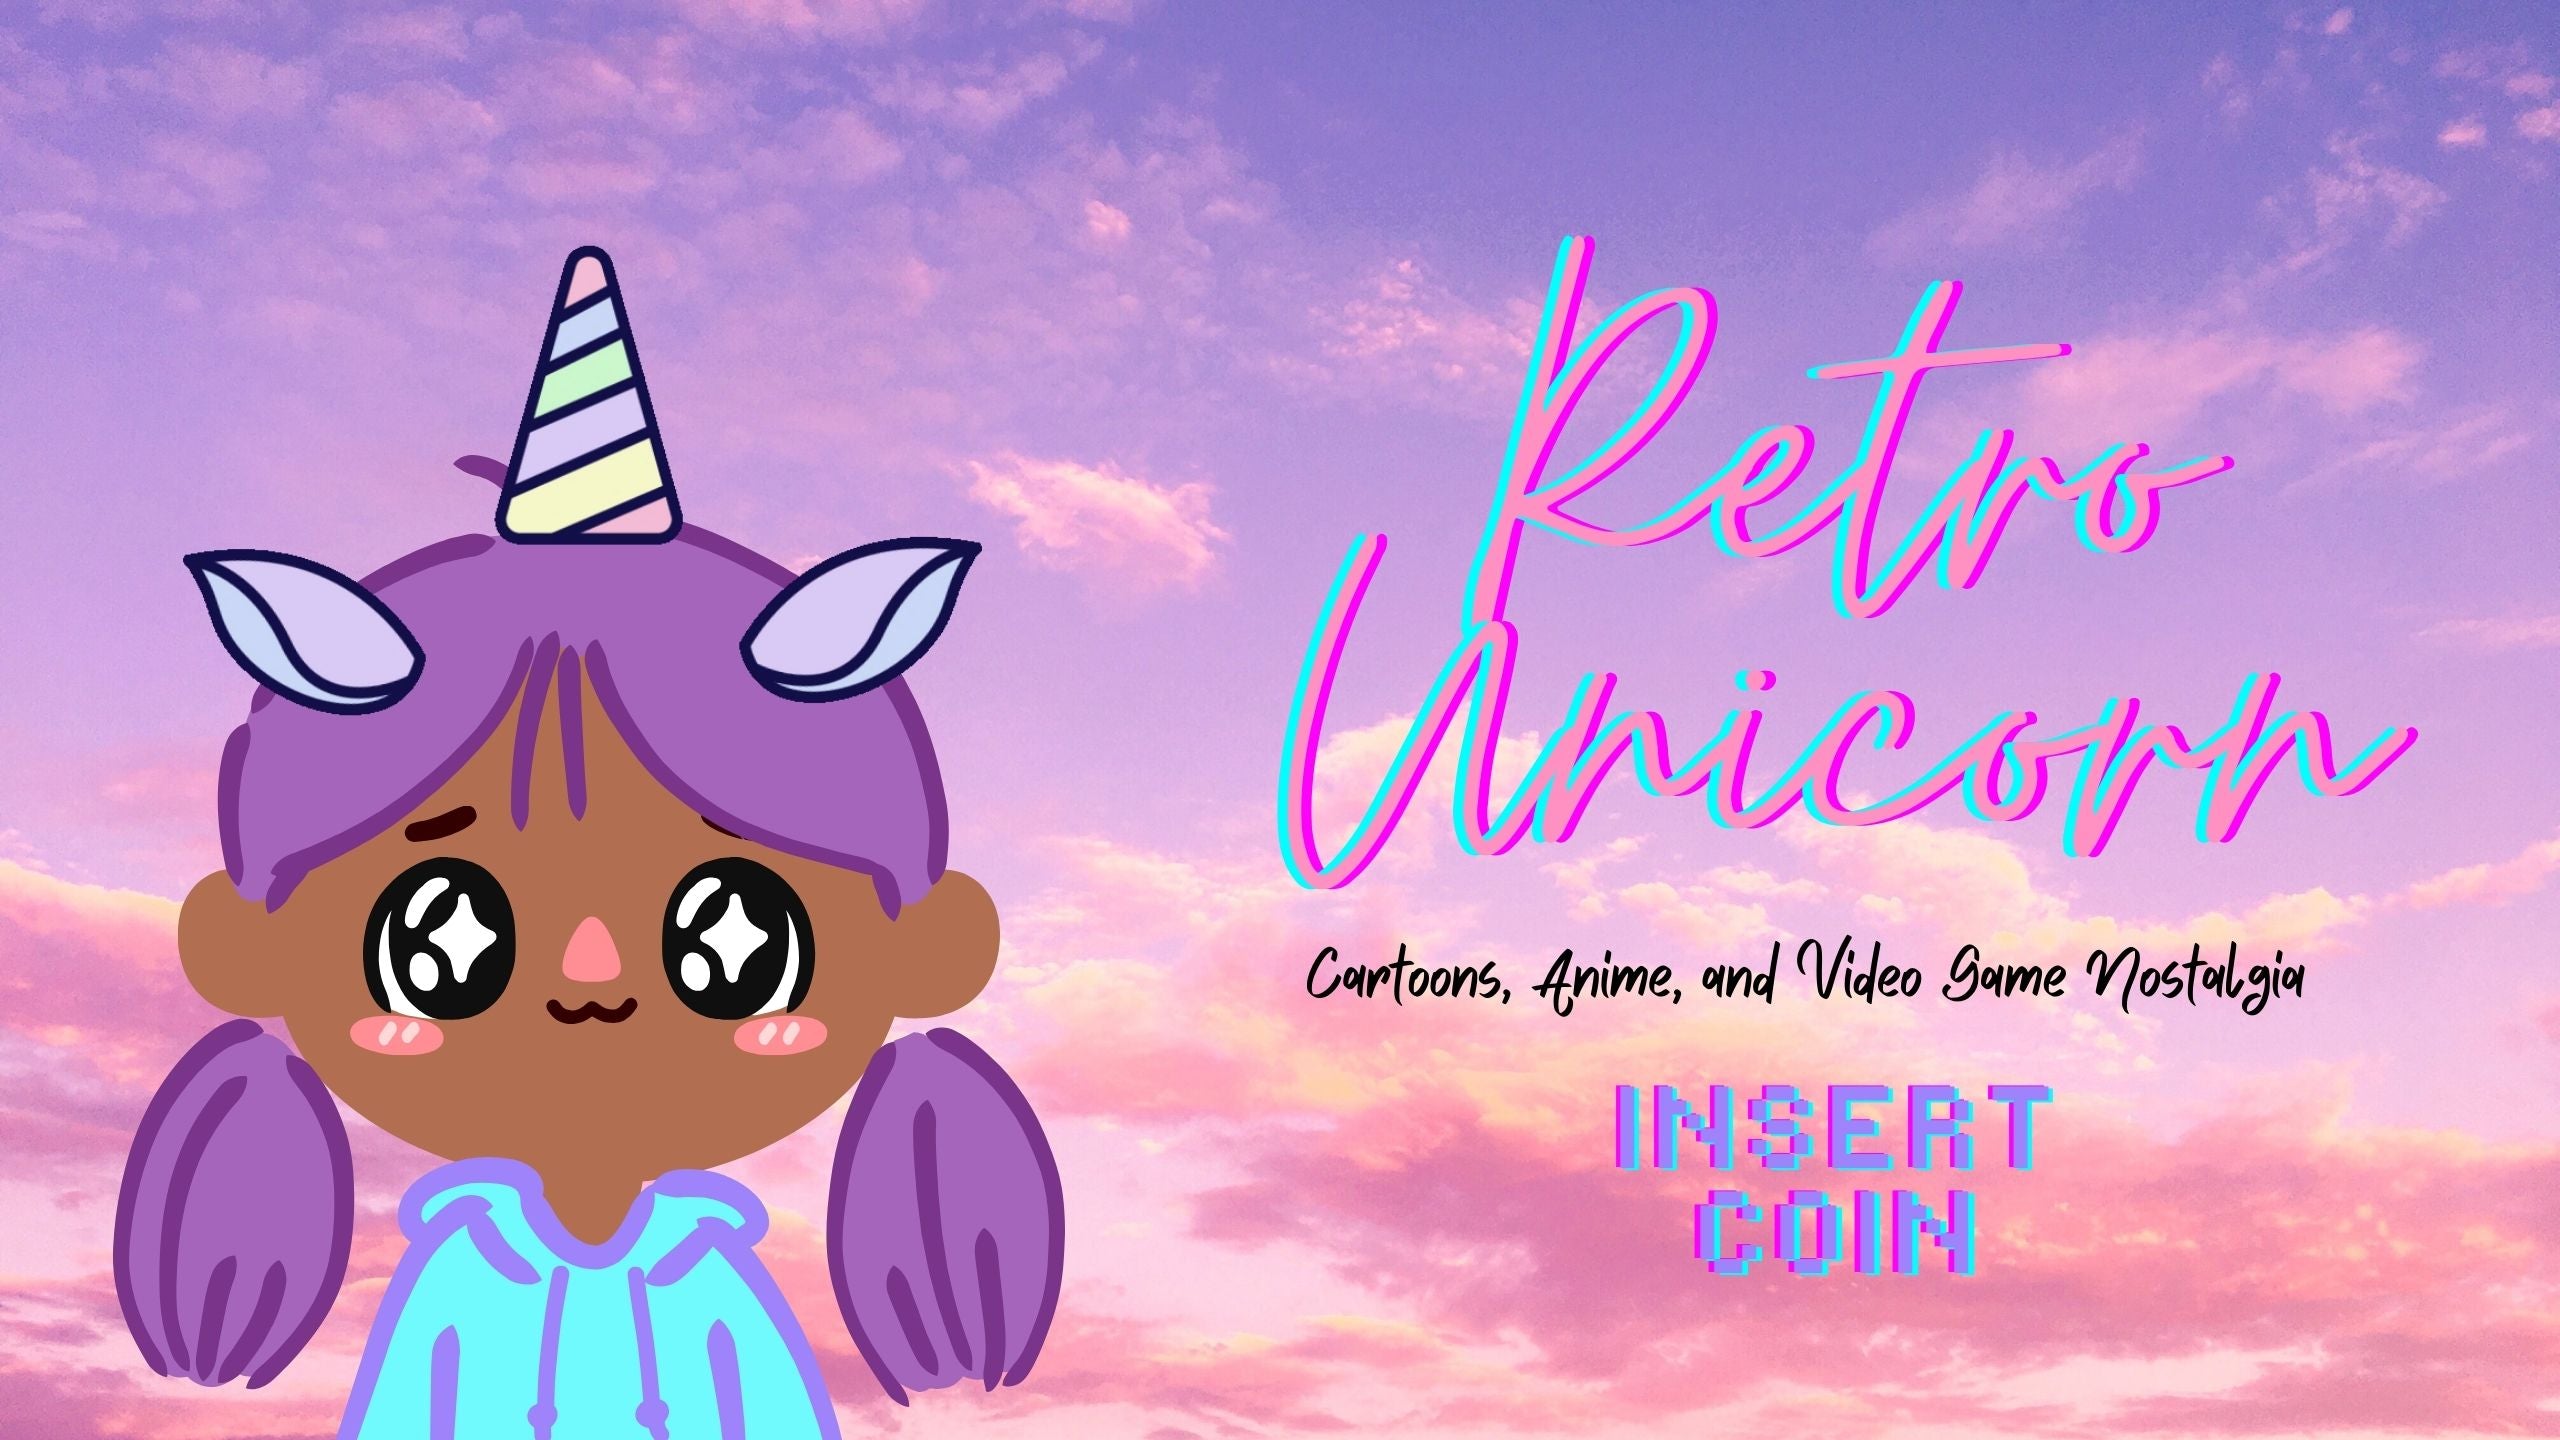 Load video: Introduction Video for Retro Unicorn Youtube Channel